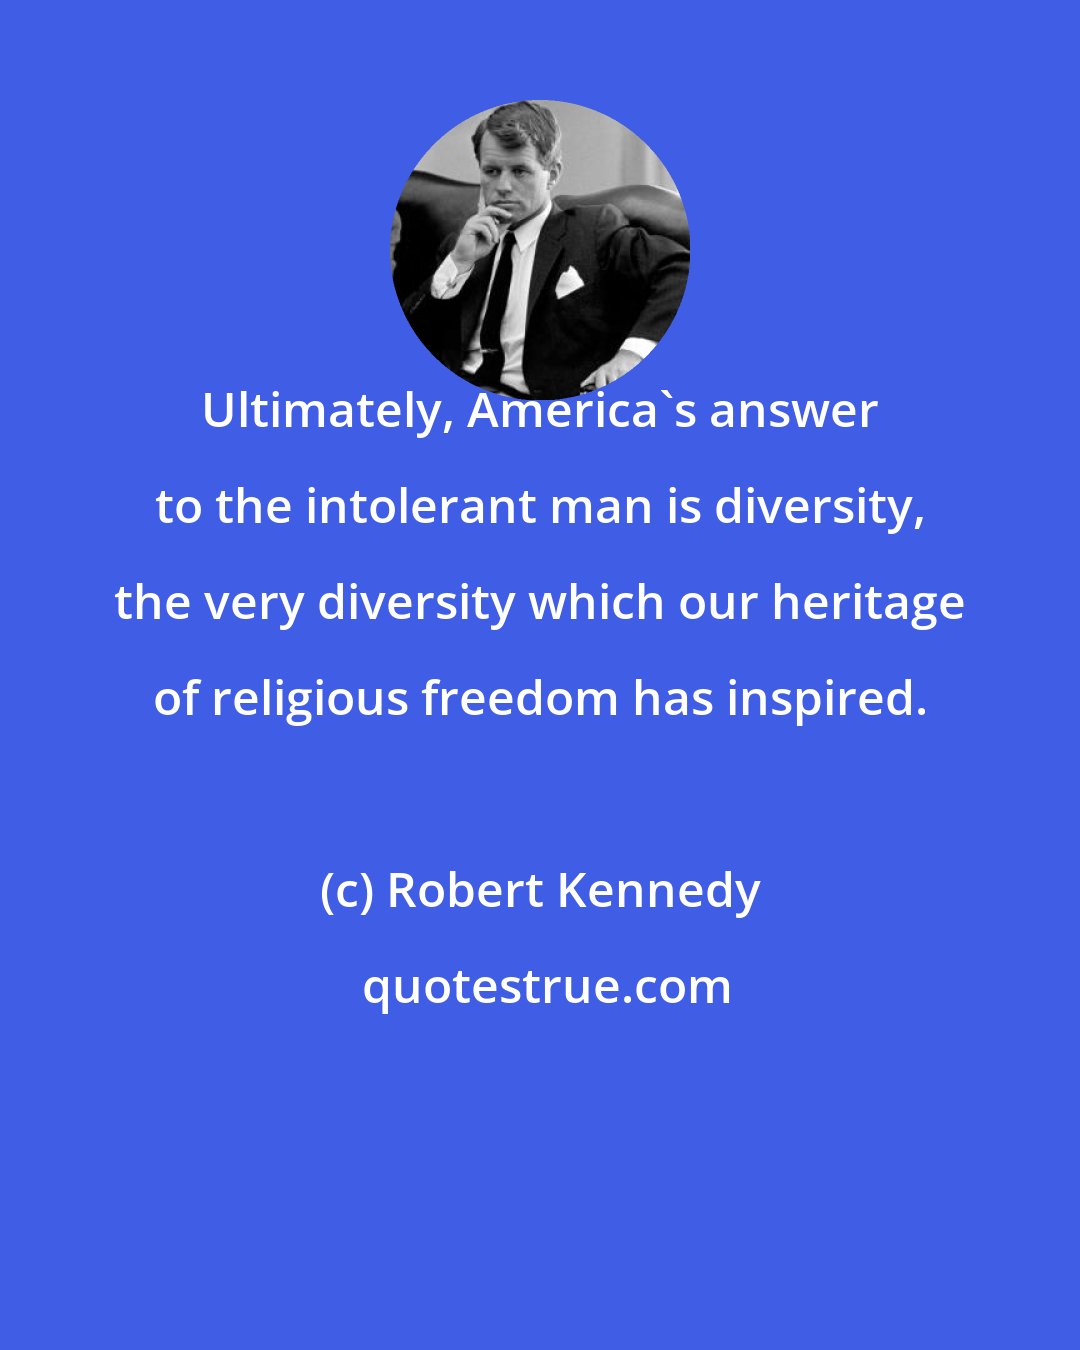 Robert Kennedy: Ultimately, America's answer to the intolerant man is diversity, the very diversity which our heritage of religious freedom has inspired.